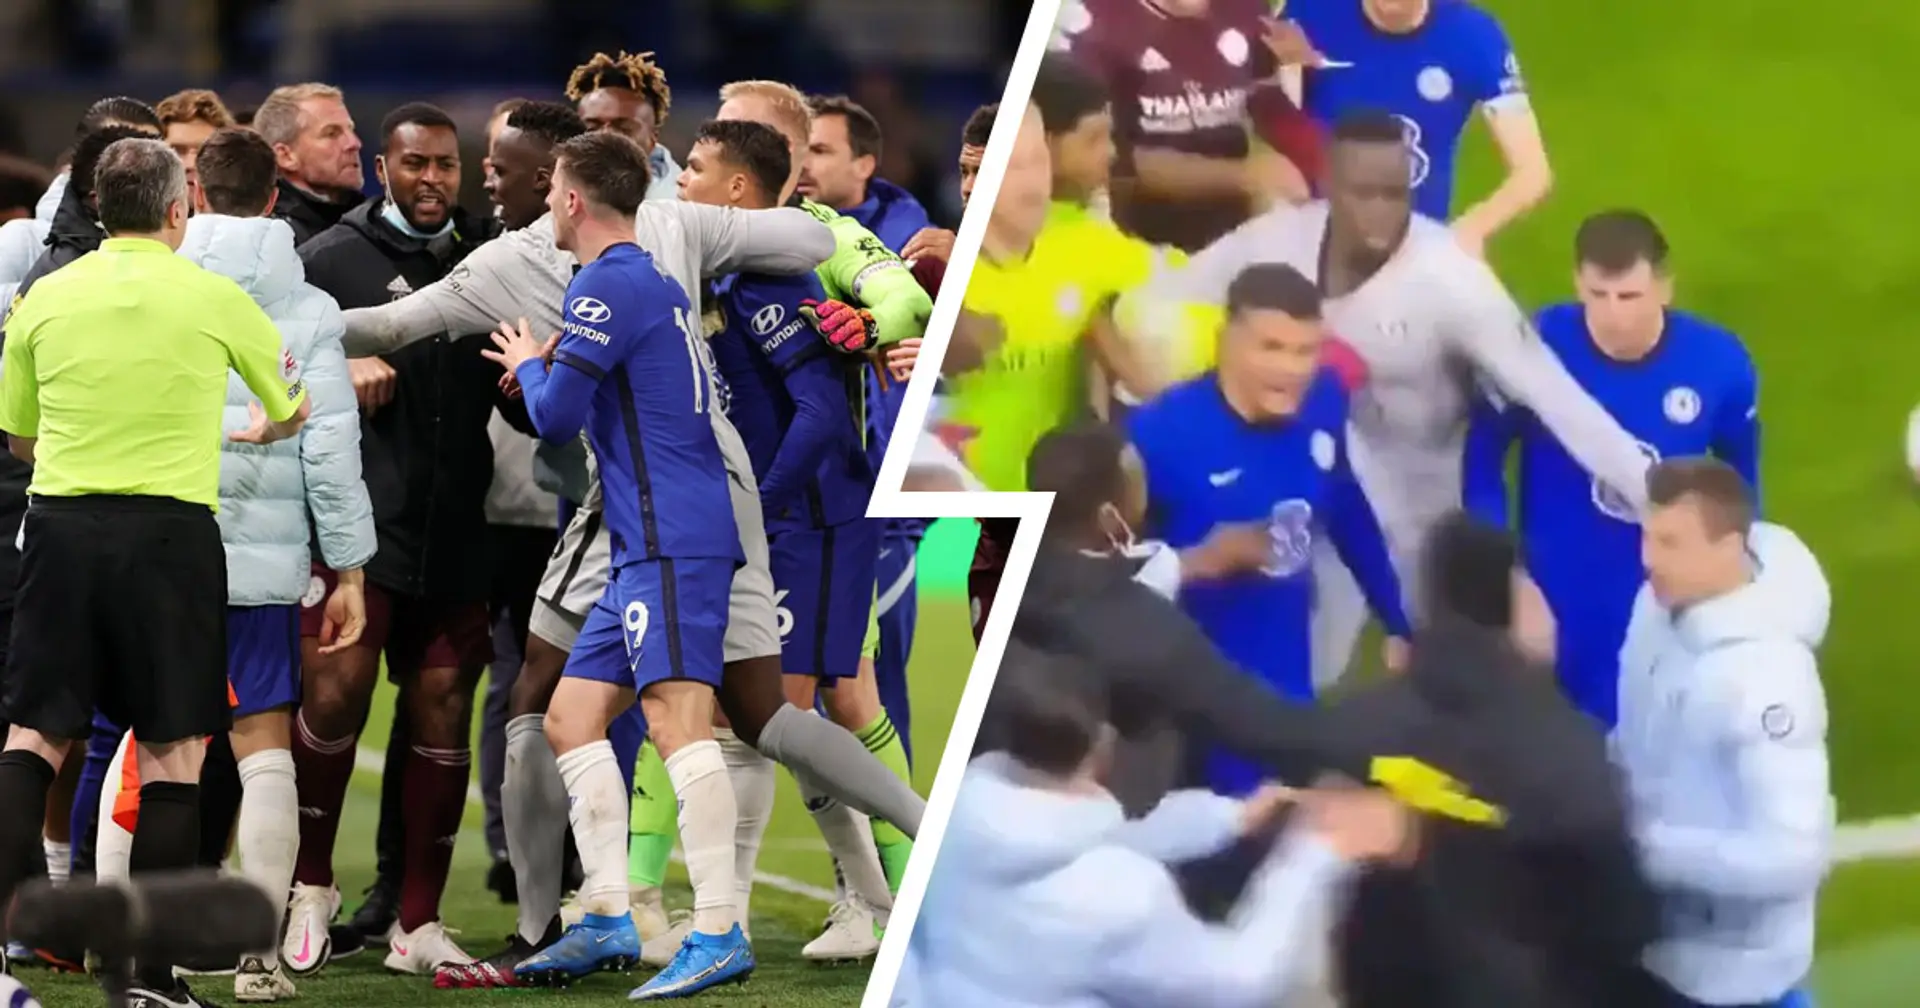 Chelsea face punishment from FA over failing to control massive brawl in Leicester win